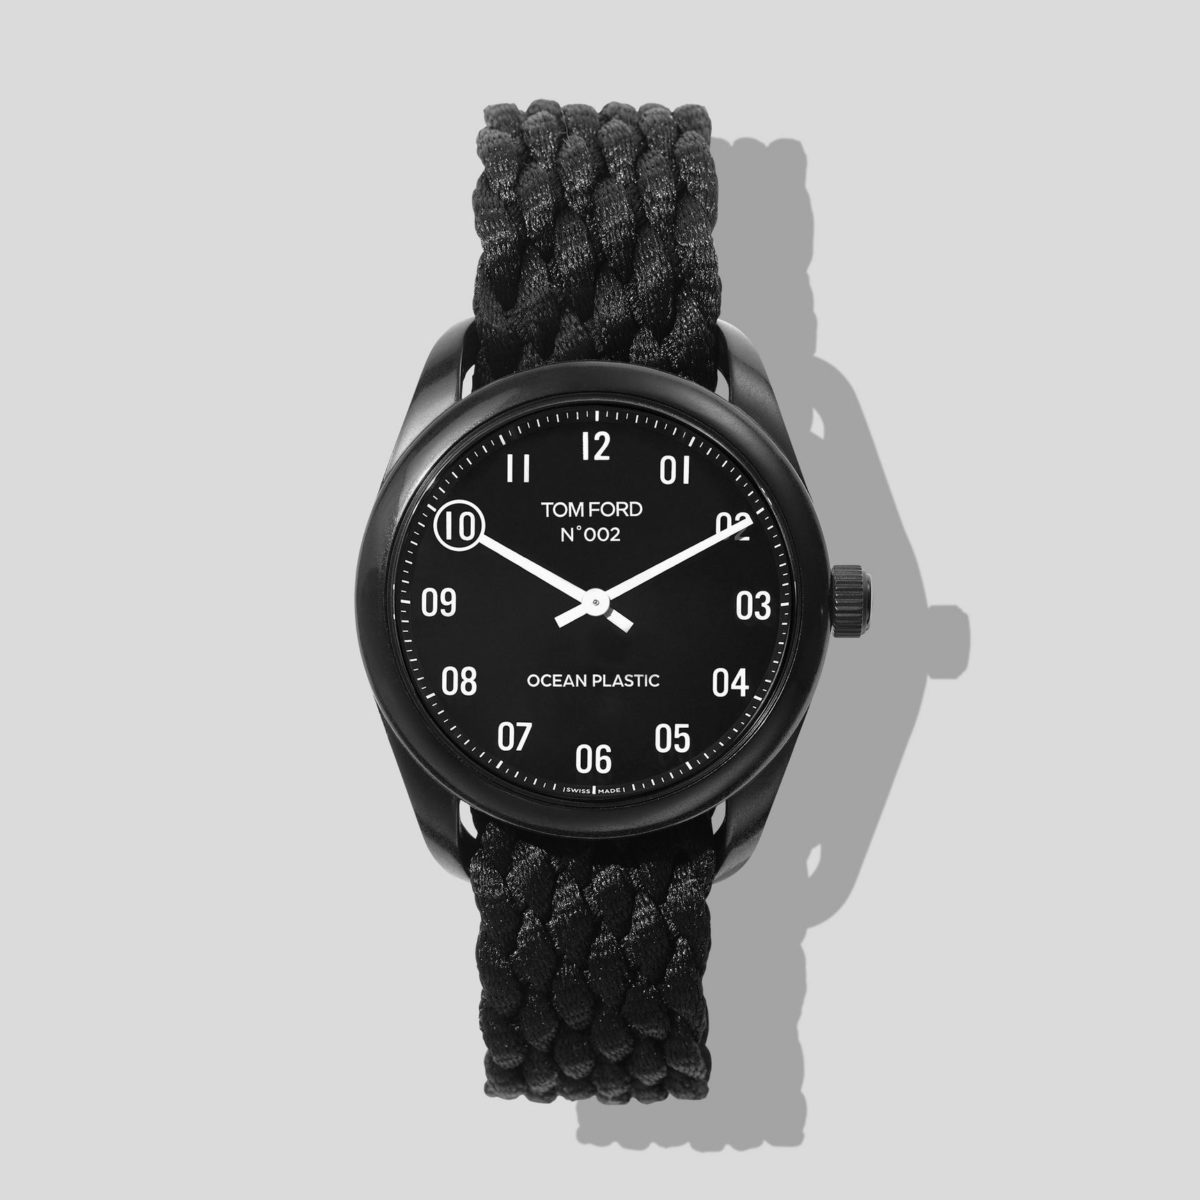 Tom Ford Drops US$995 Watch Made From Ocean Plastic